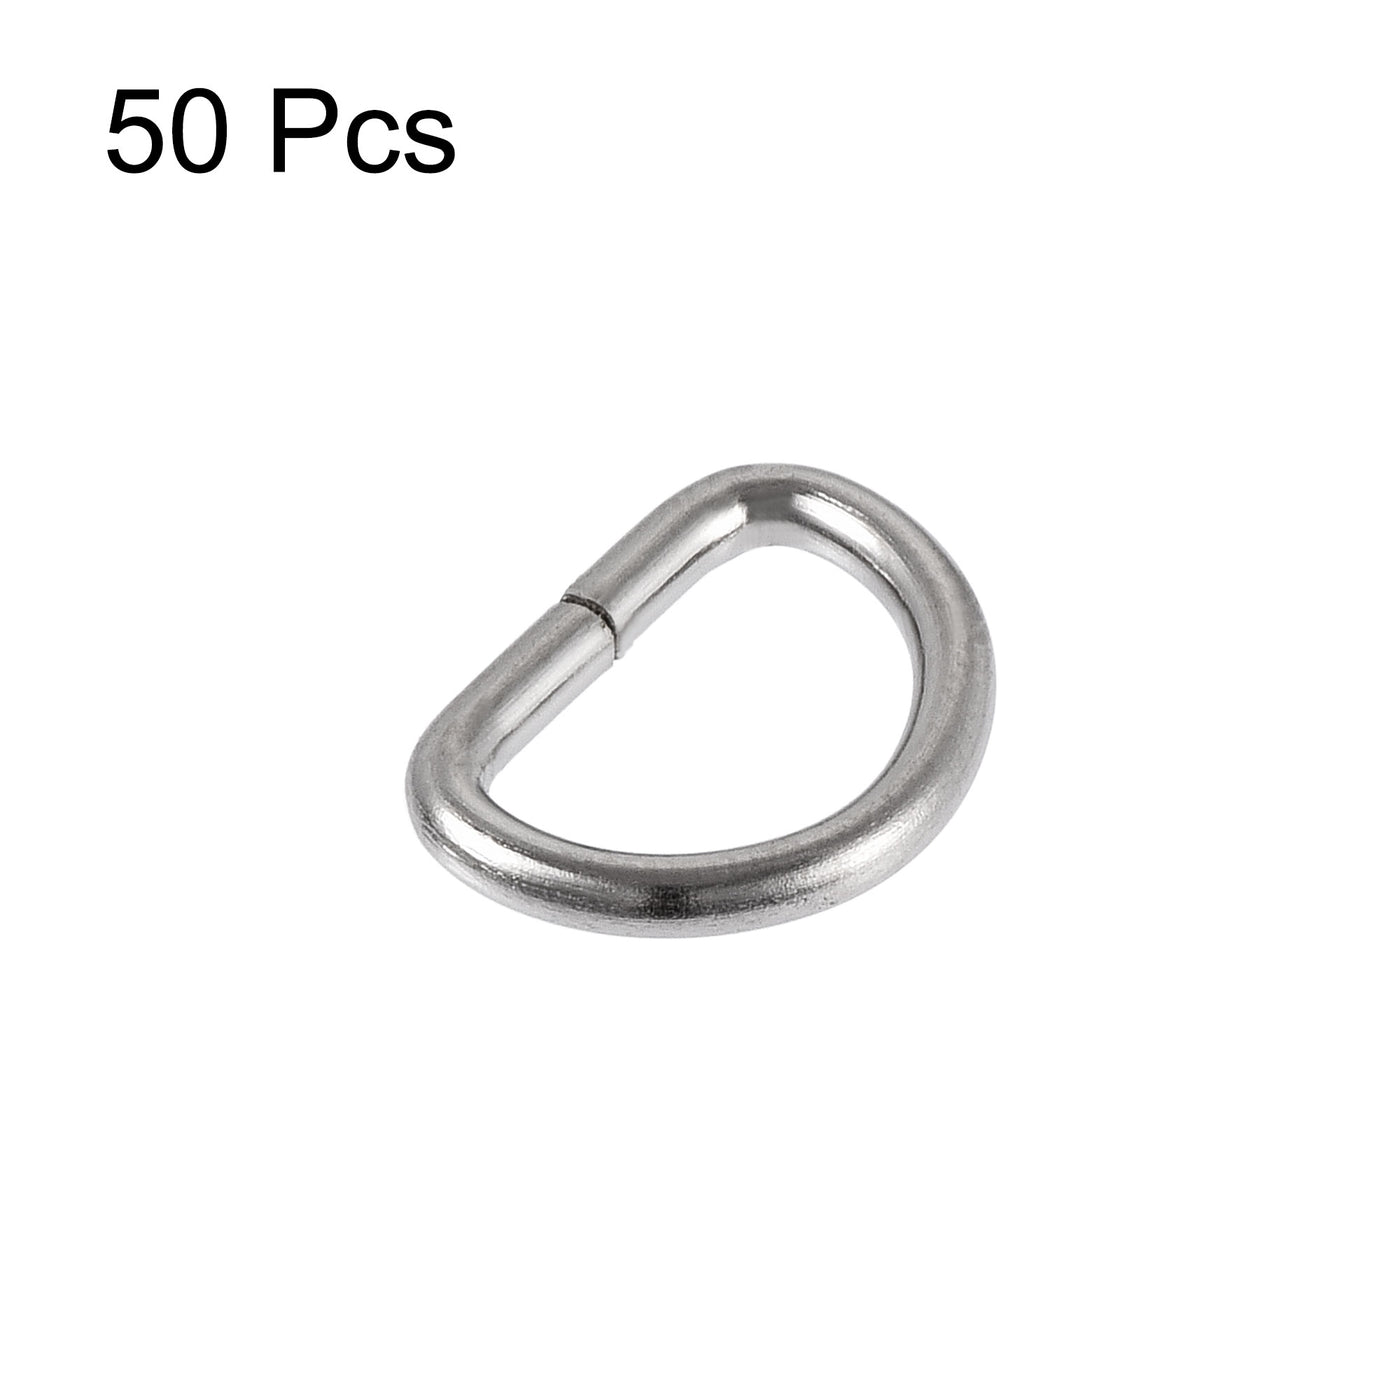 uxcell Uxcell Metal D Ring 0.39"(10mm) D-Rings Buckle for Hardware Bags Belts Craft DIY Accessories Silver Tone 50pcs